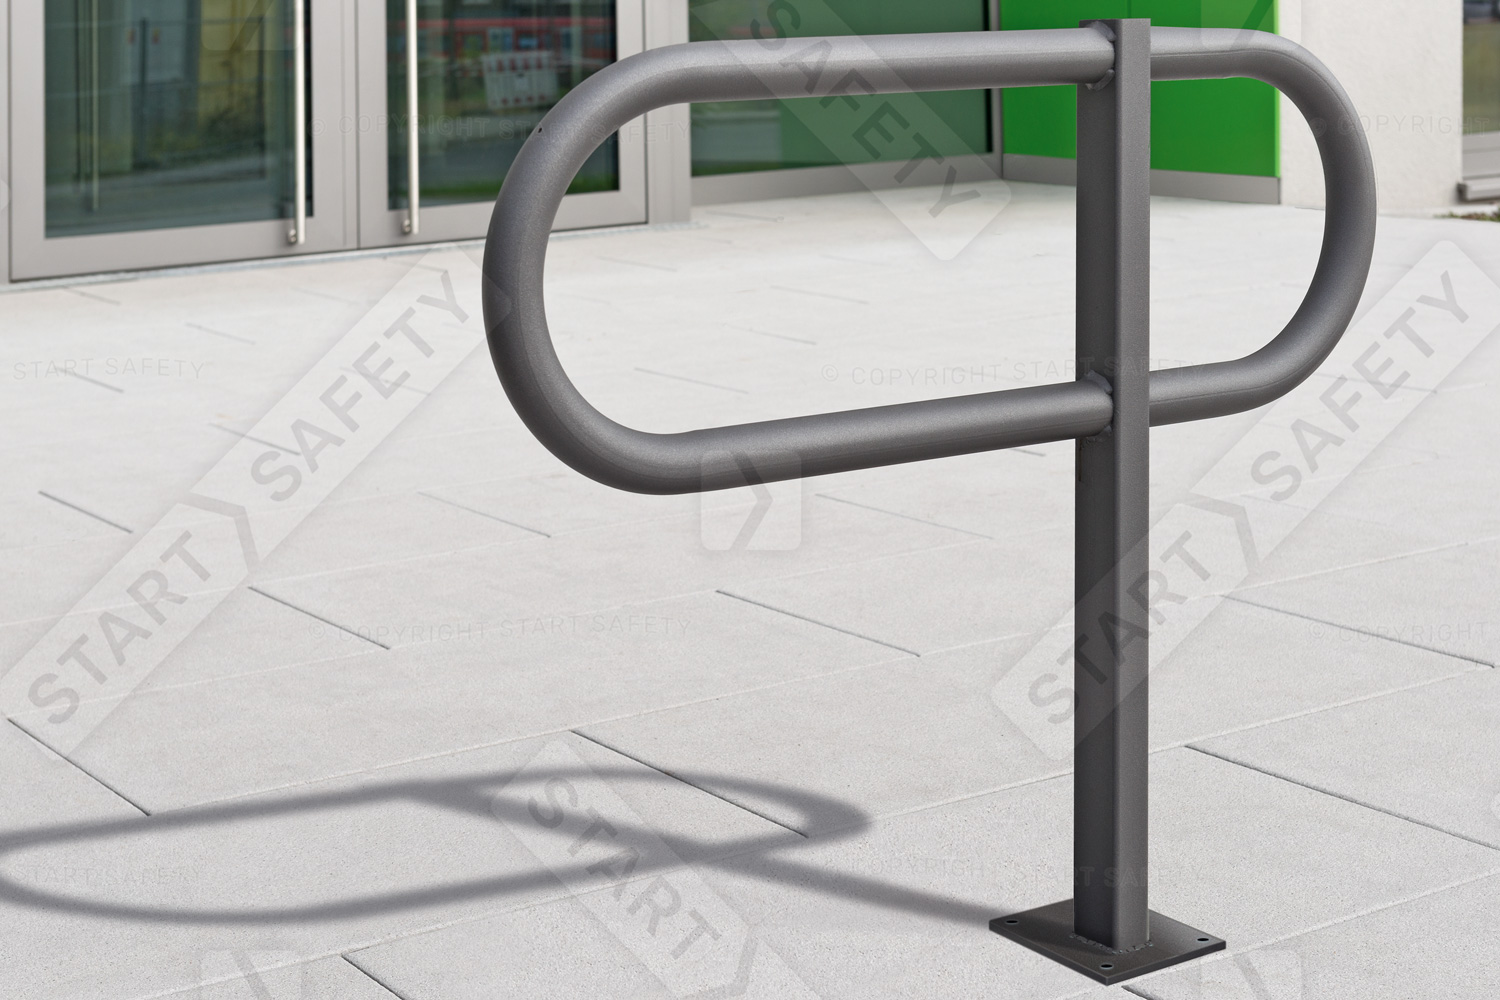 Bolt down cycle stand